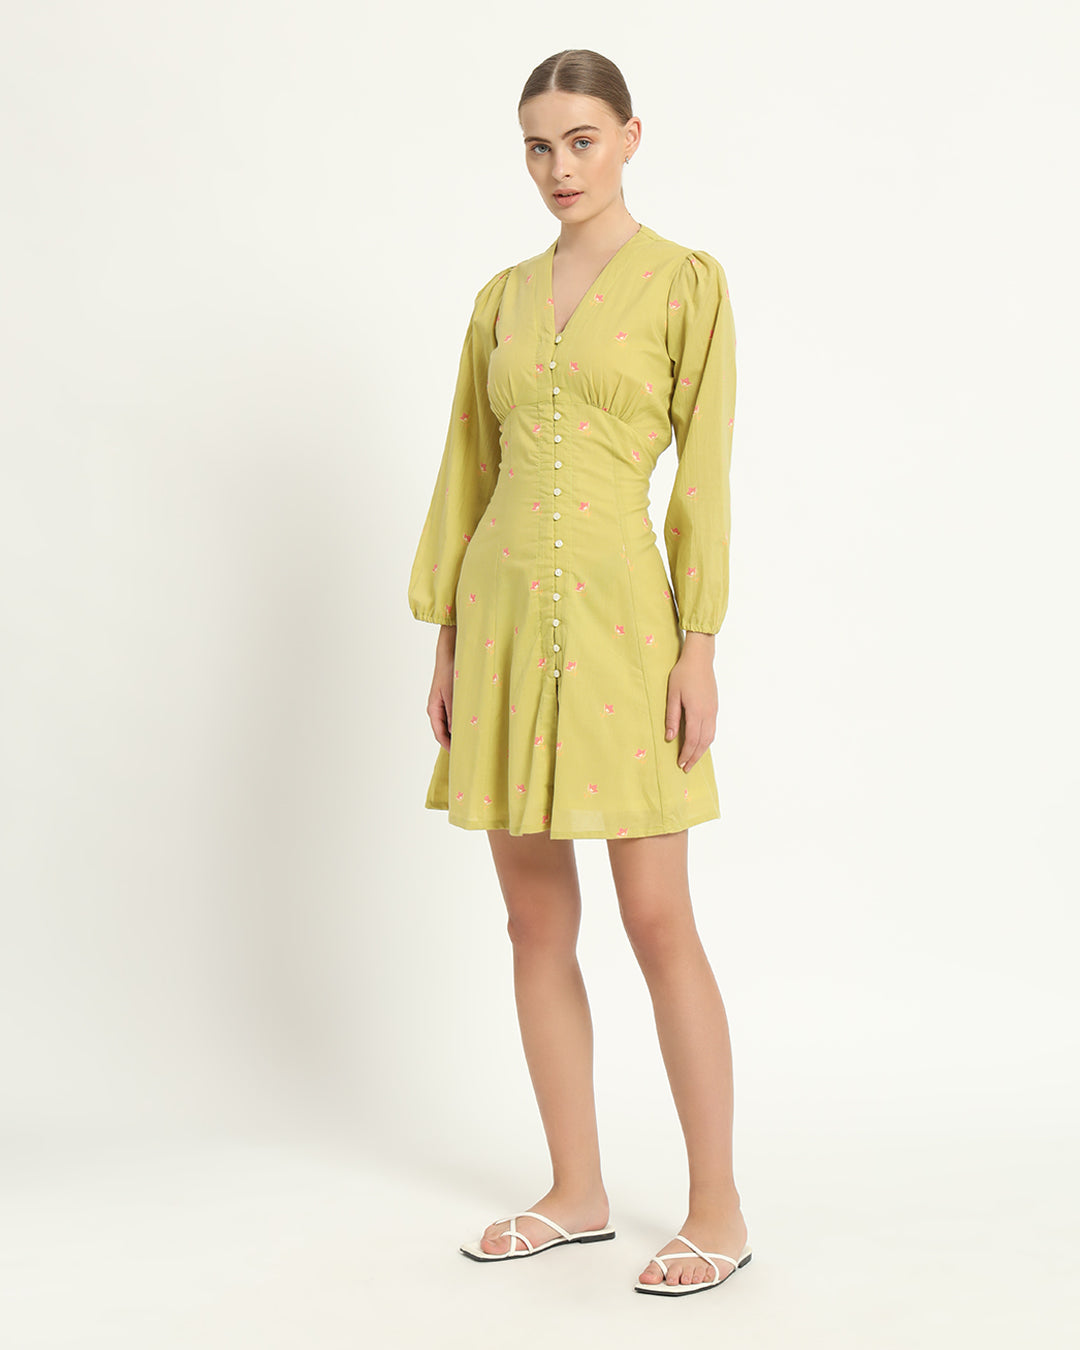 The Dafni Lime Cosmos Cotton Dress